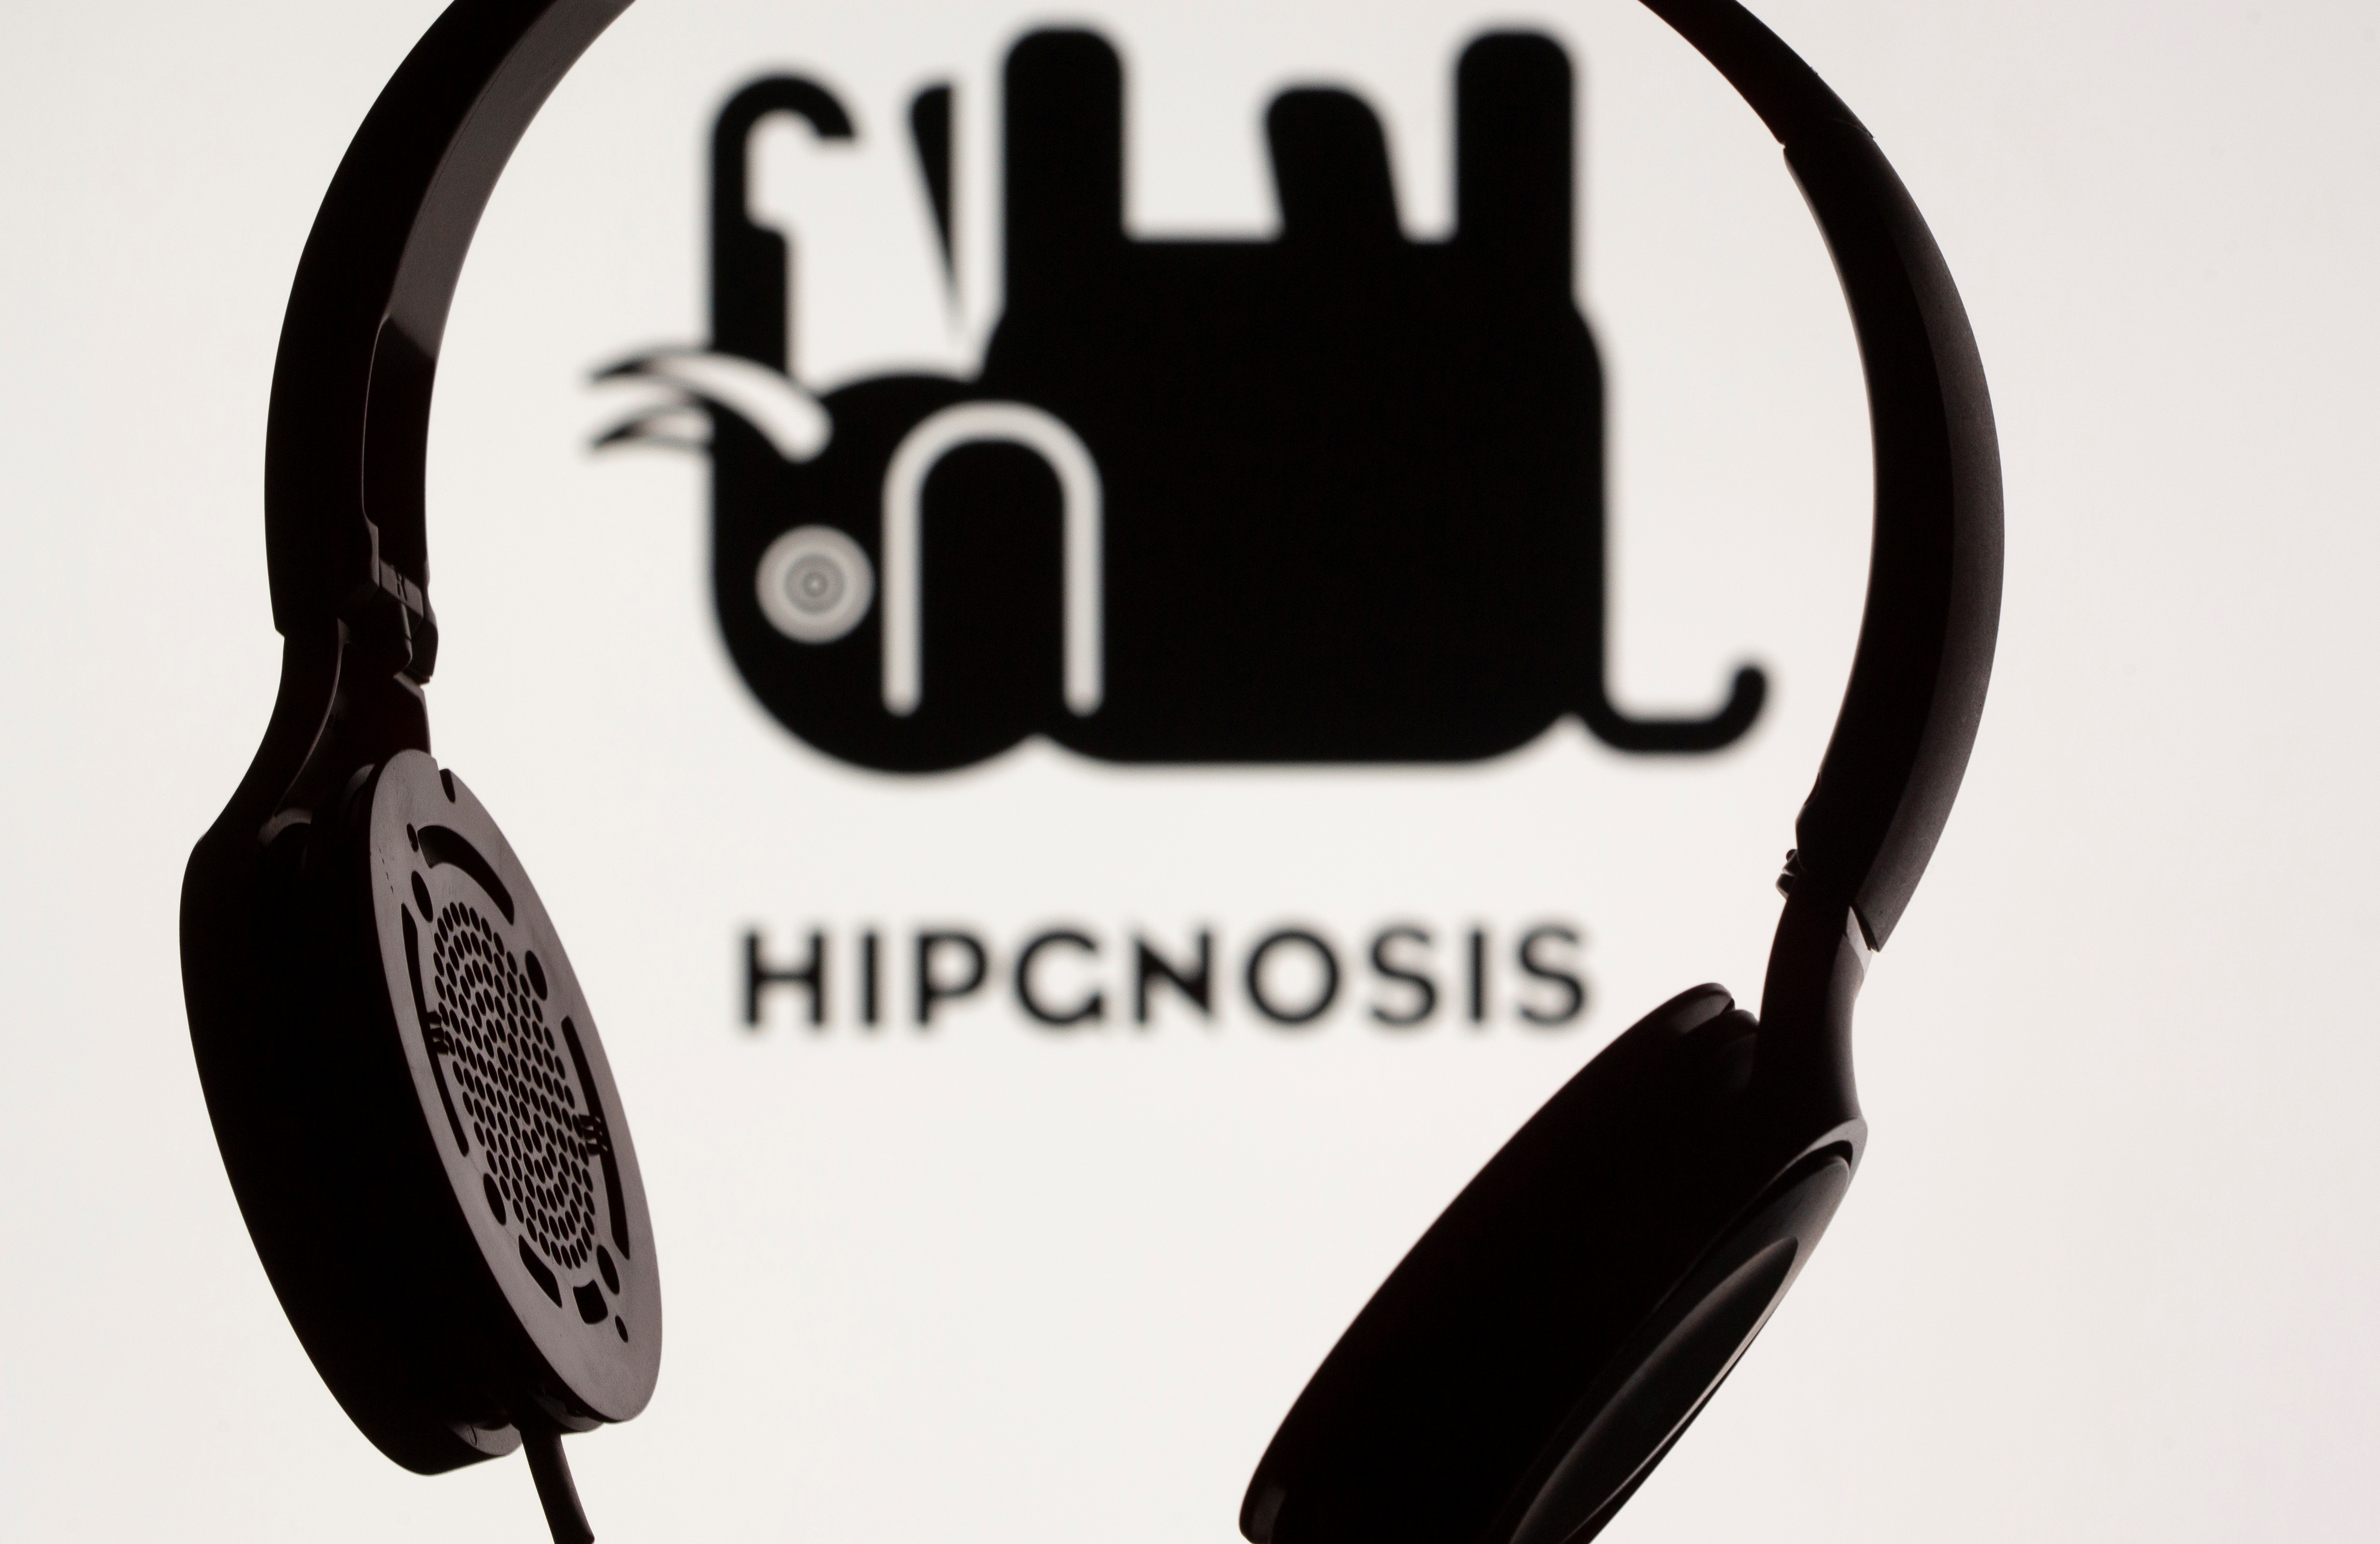 Headset seen in front of displayed Hipgnosis logo in this illustration taken